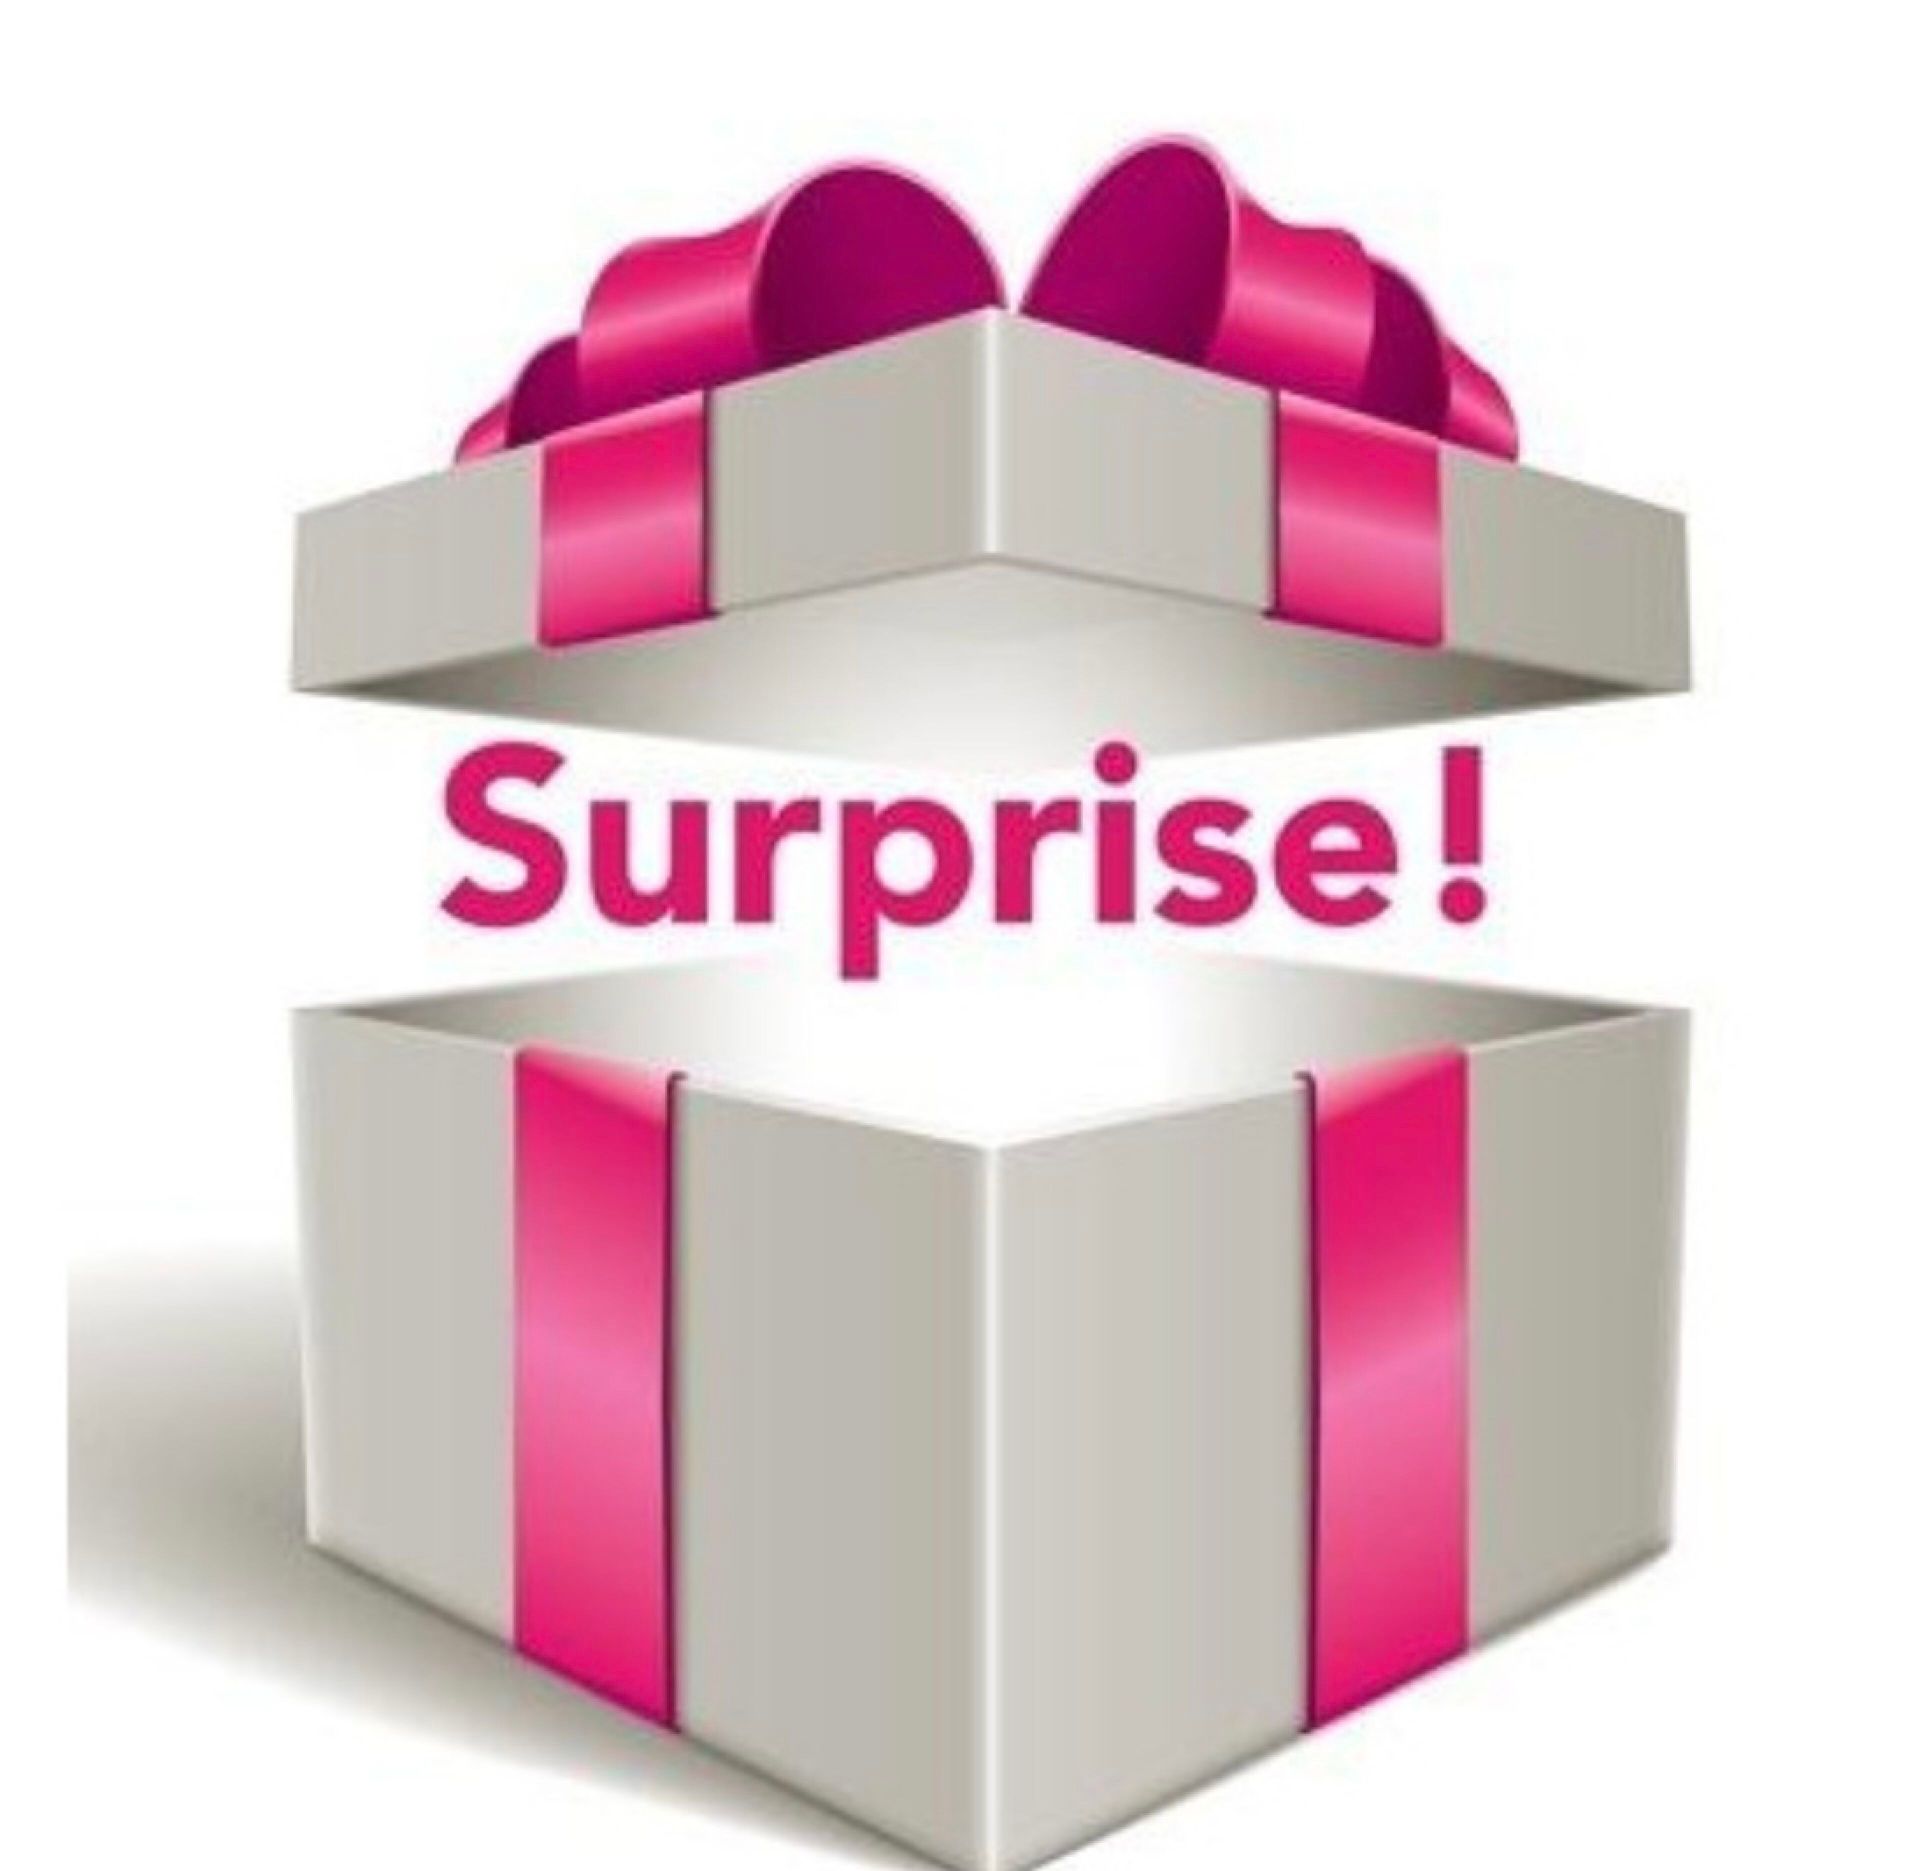 Null "Olympic Surprise 
Surprise" prize offered and signed by Diane de Navacelle&hellip;